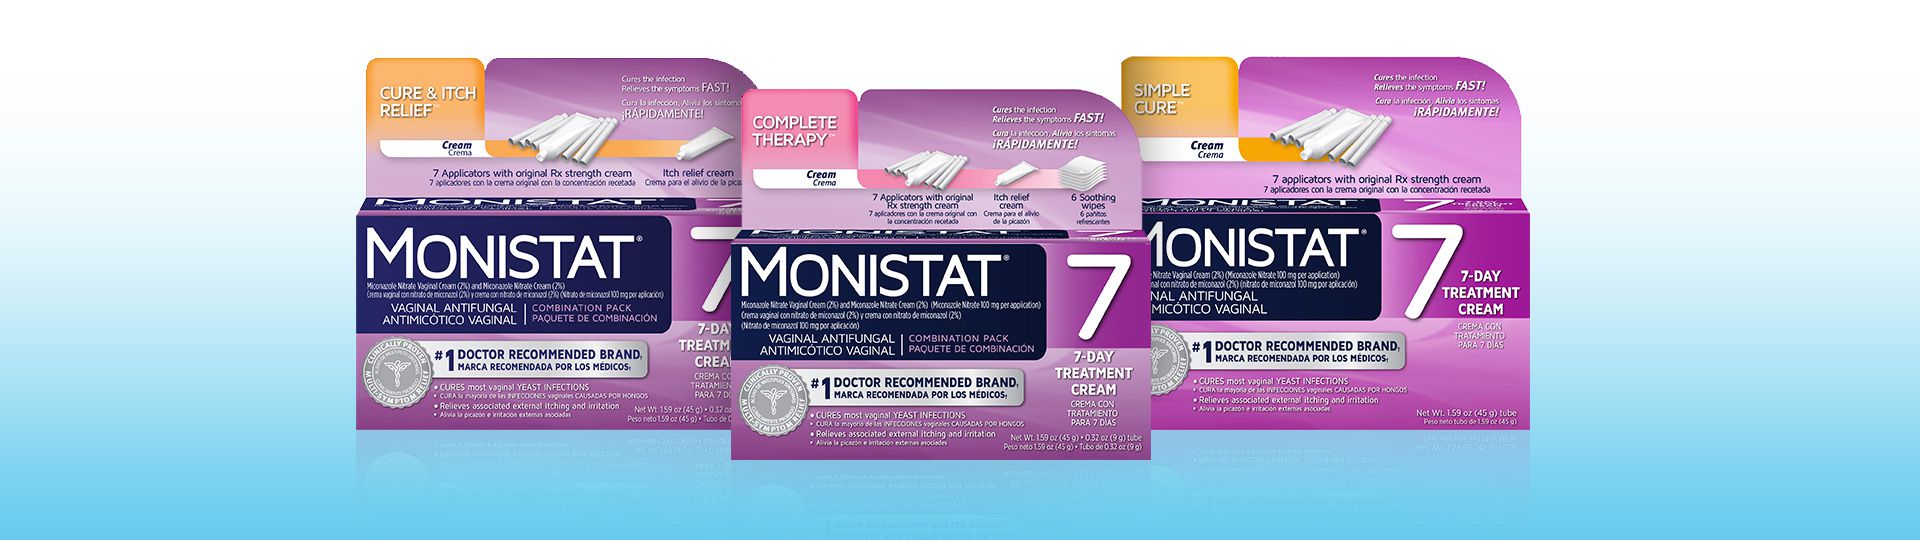 MONISTAT® Is Important For Those Not-So Comfortable Moments